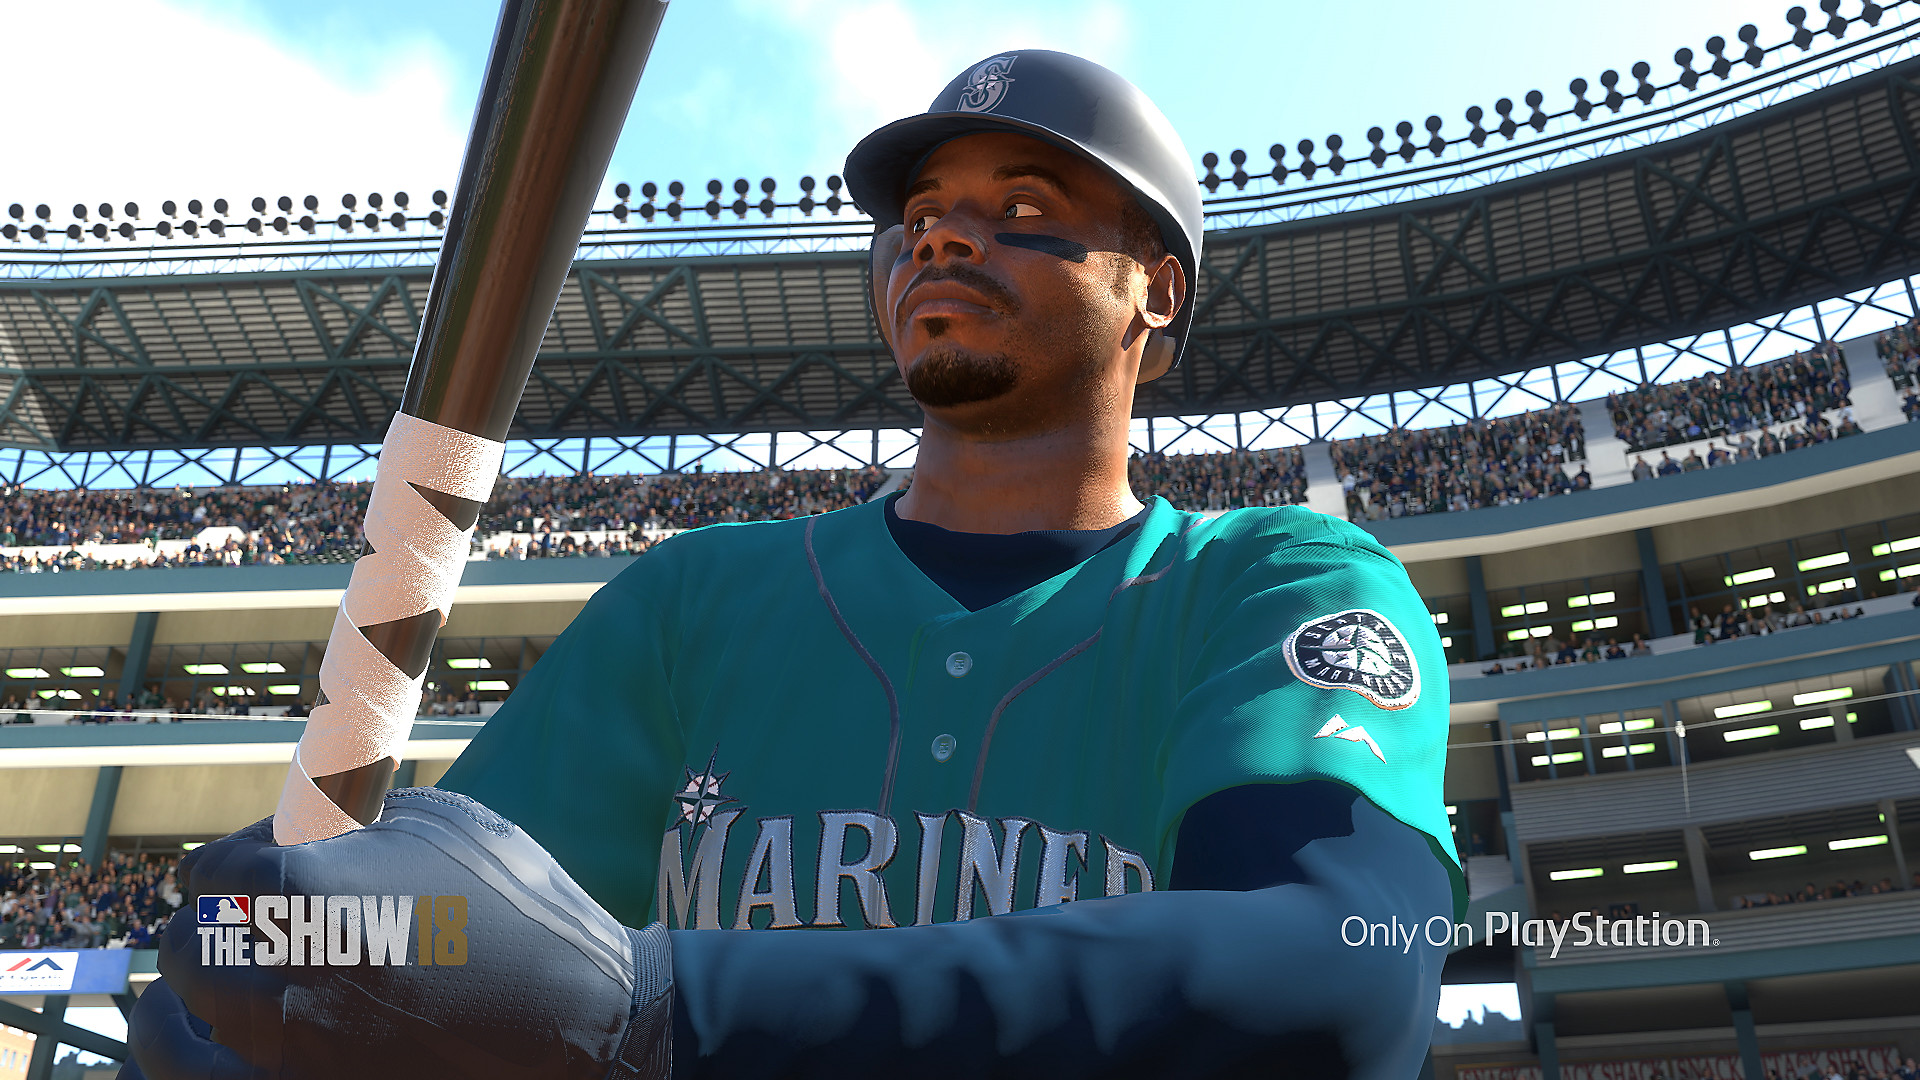 MLB The Show 18 1.13 Update Patch Notes Revealed